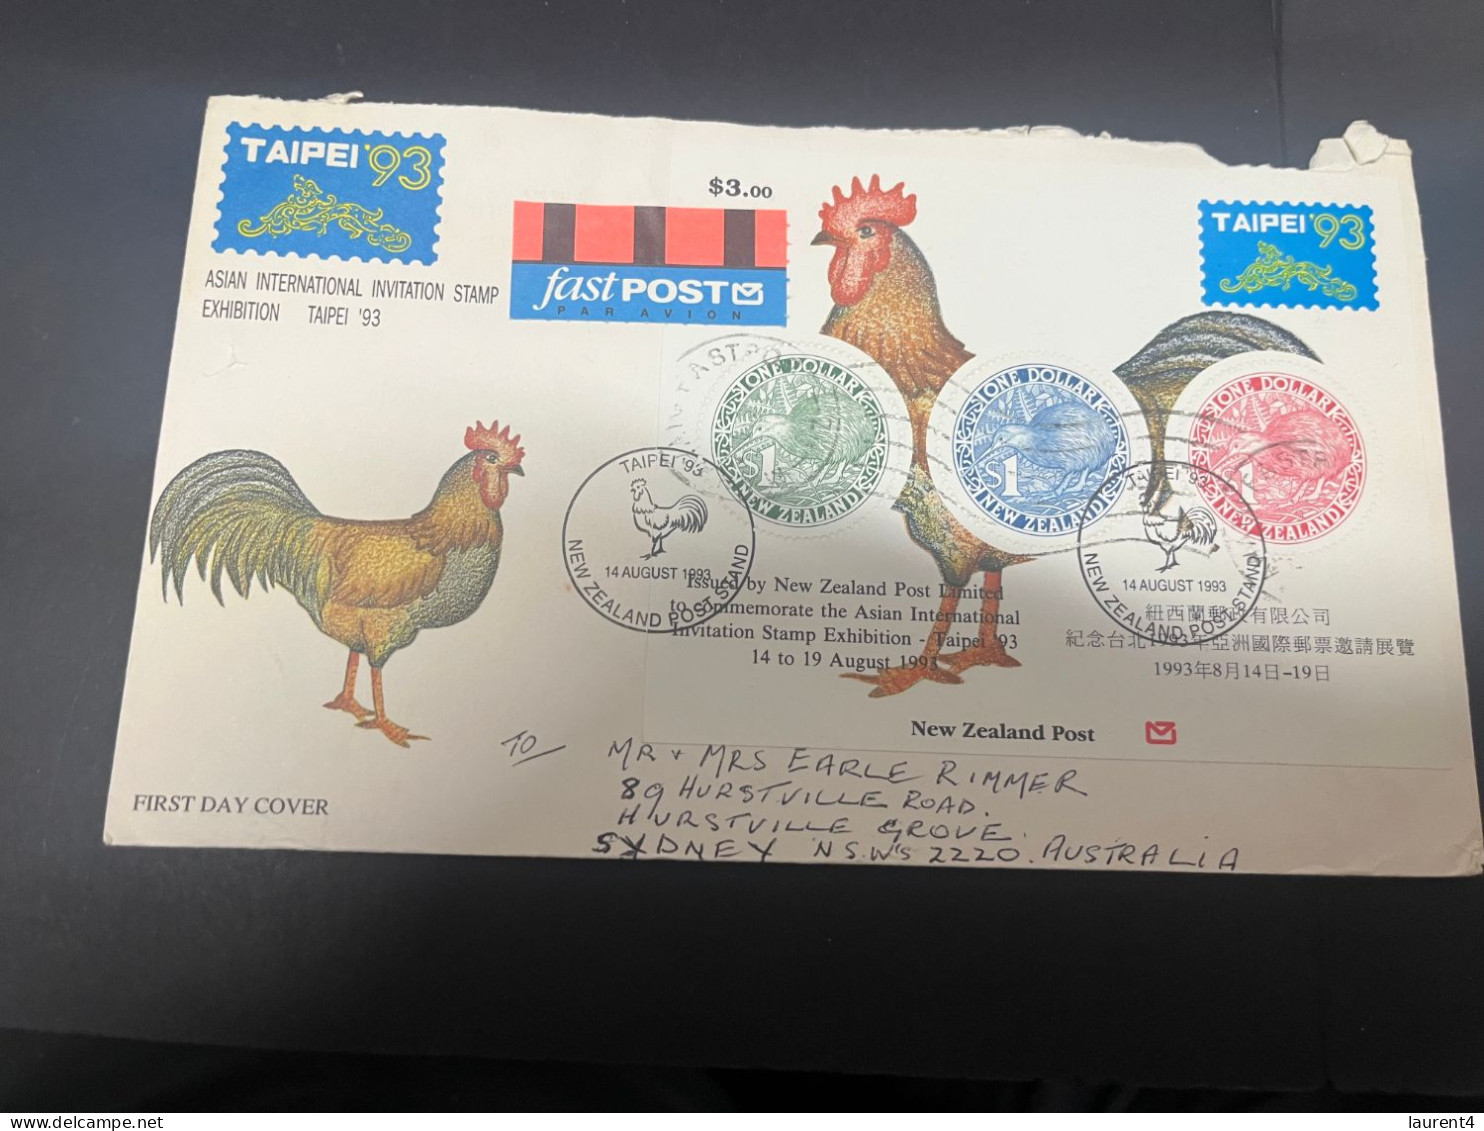 14-4-2024 (2 Z 4) FDC Used As Postage - New Zealand - Posted To Sydney 1993 - Taipei 93 Stsmp Expo - Round Kiwi M/s - FDC